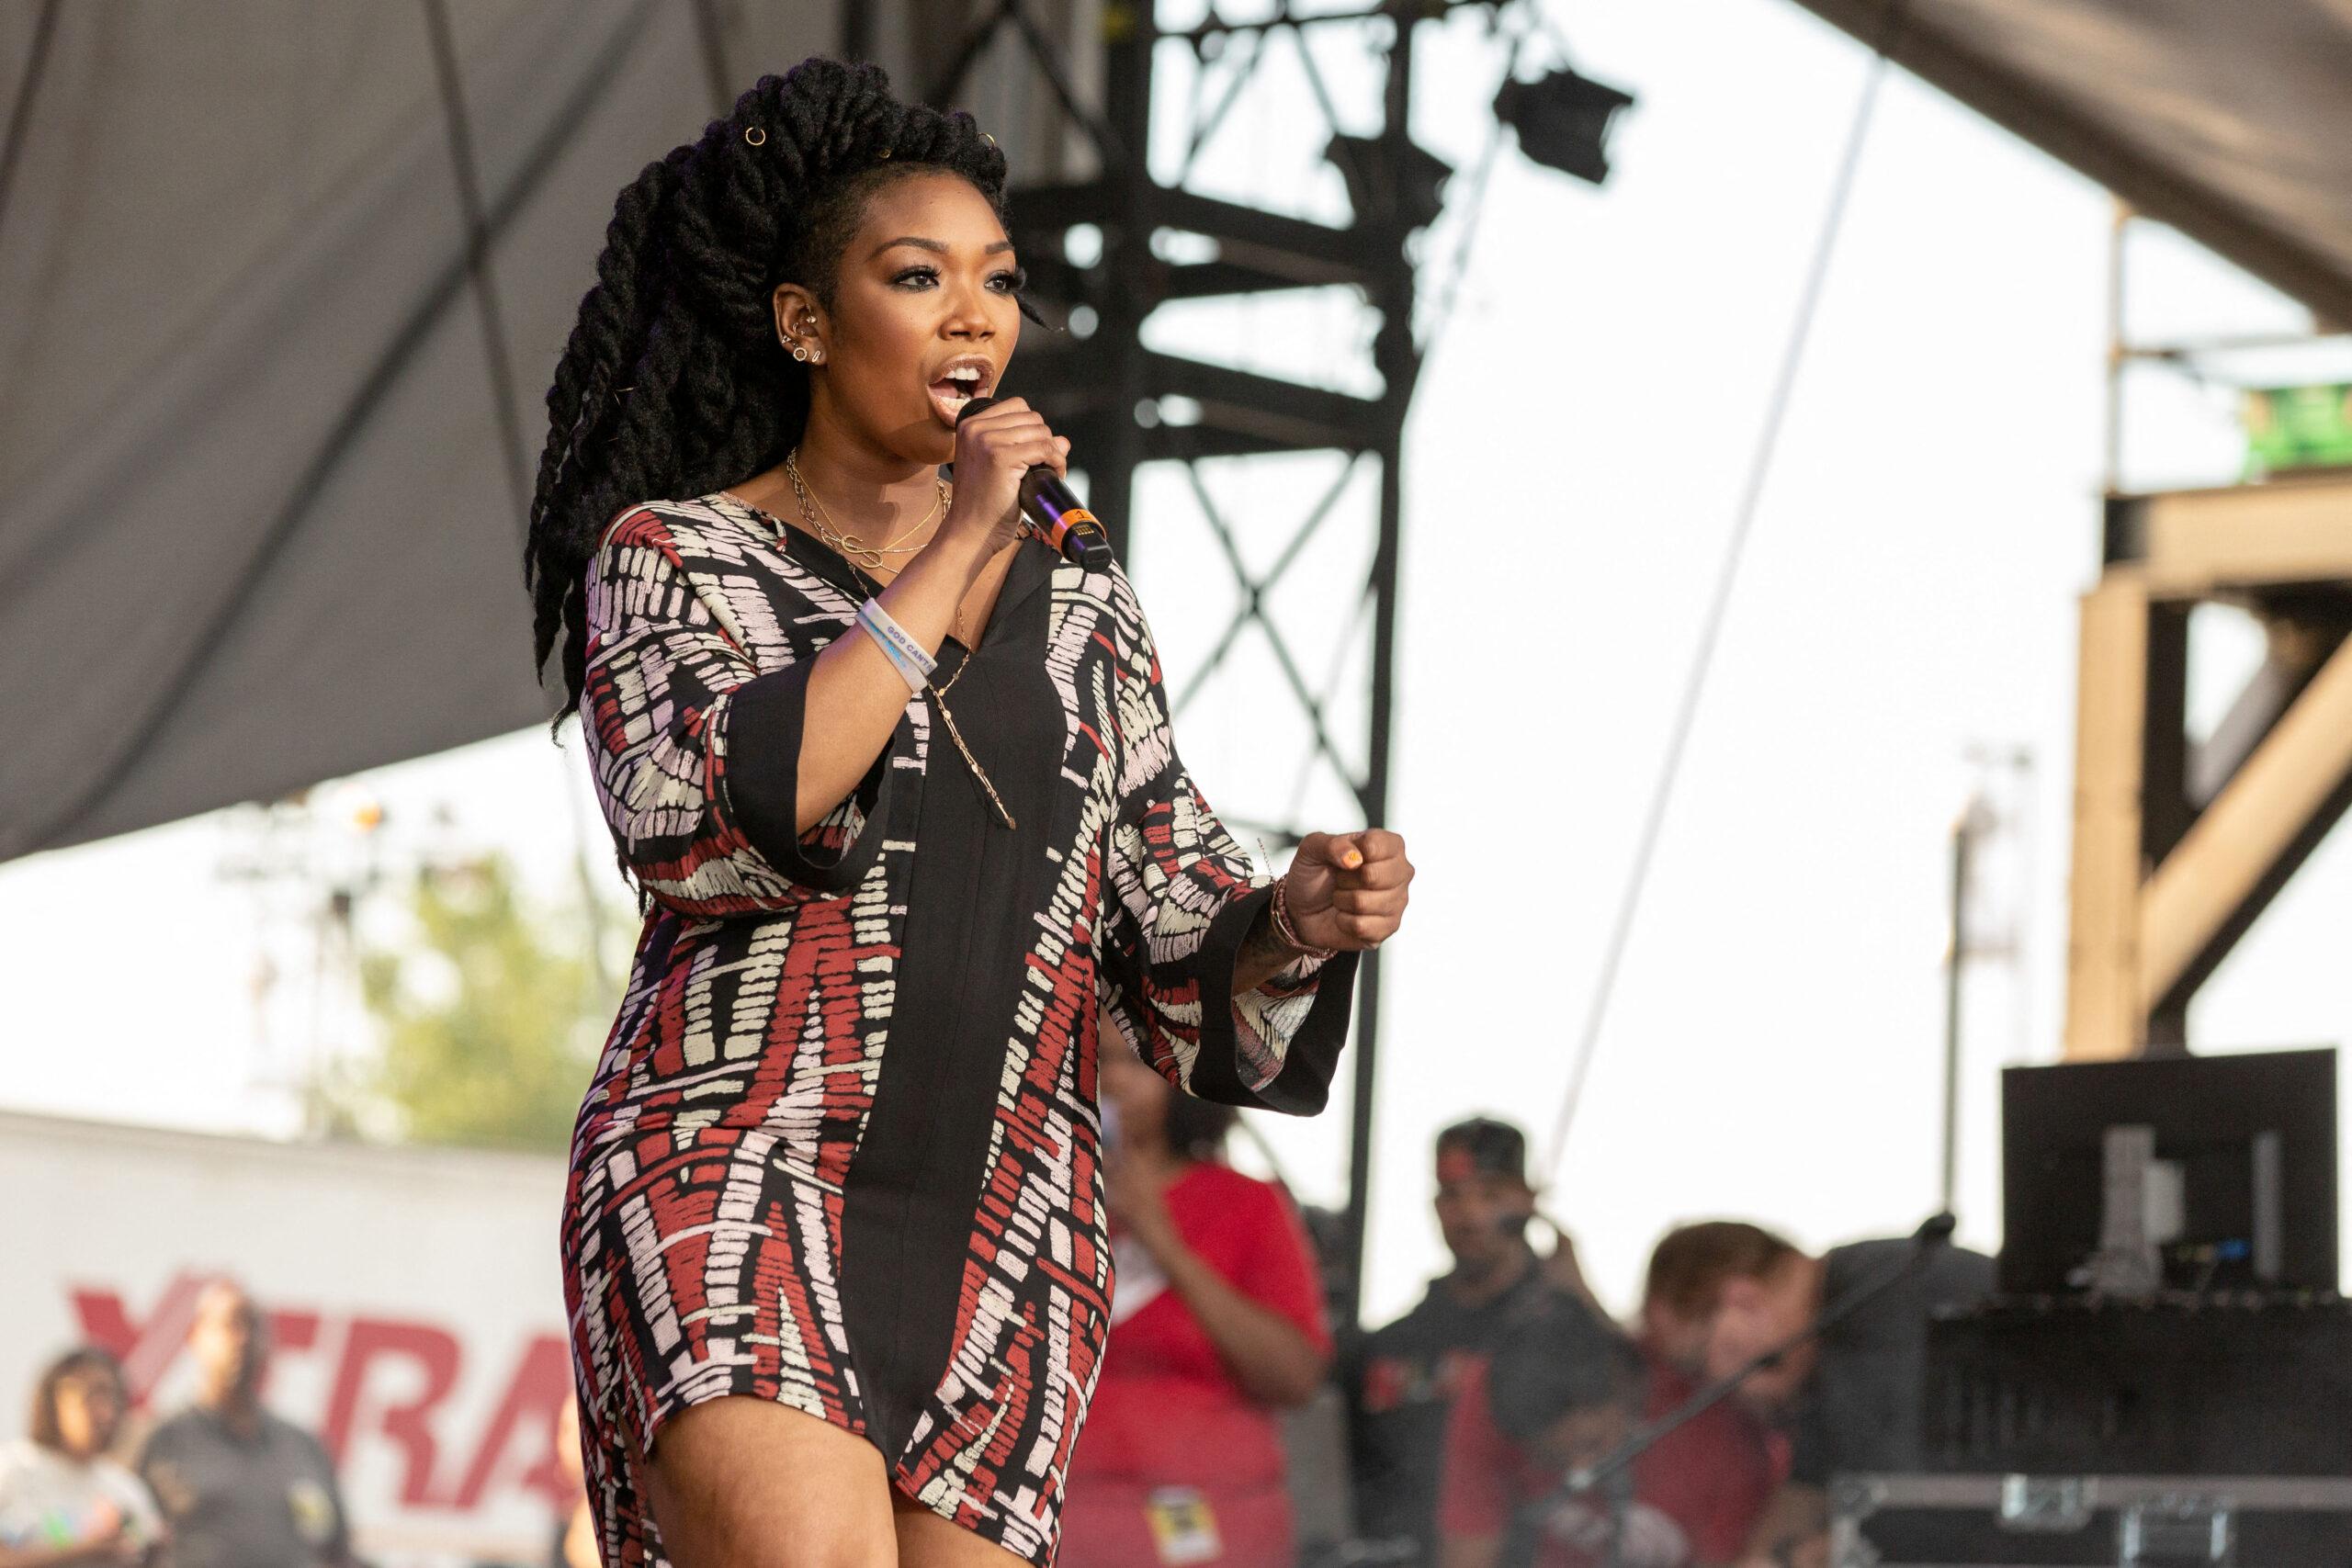 Brandy at the 2018 V103 Summer Block Party in Chicago